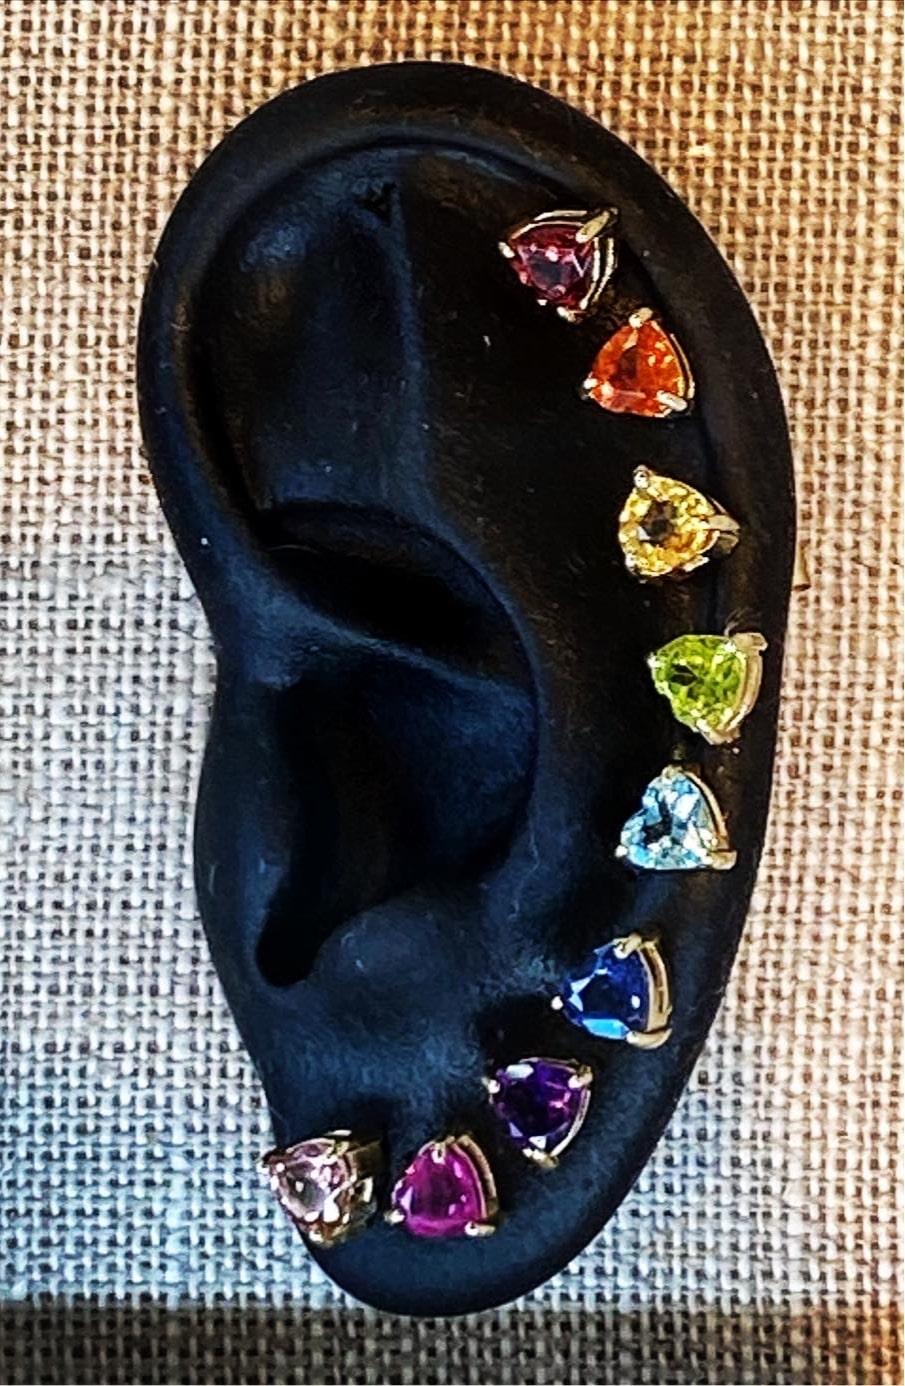 Pick your favorite color: The full rainbow fantasy in the most unique and colorful studs to light up your ear and frame your face.
Choose any color stone or diamond in a single or pair options and if you have more than one hole, layer them for full